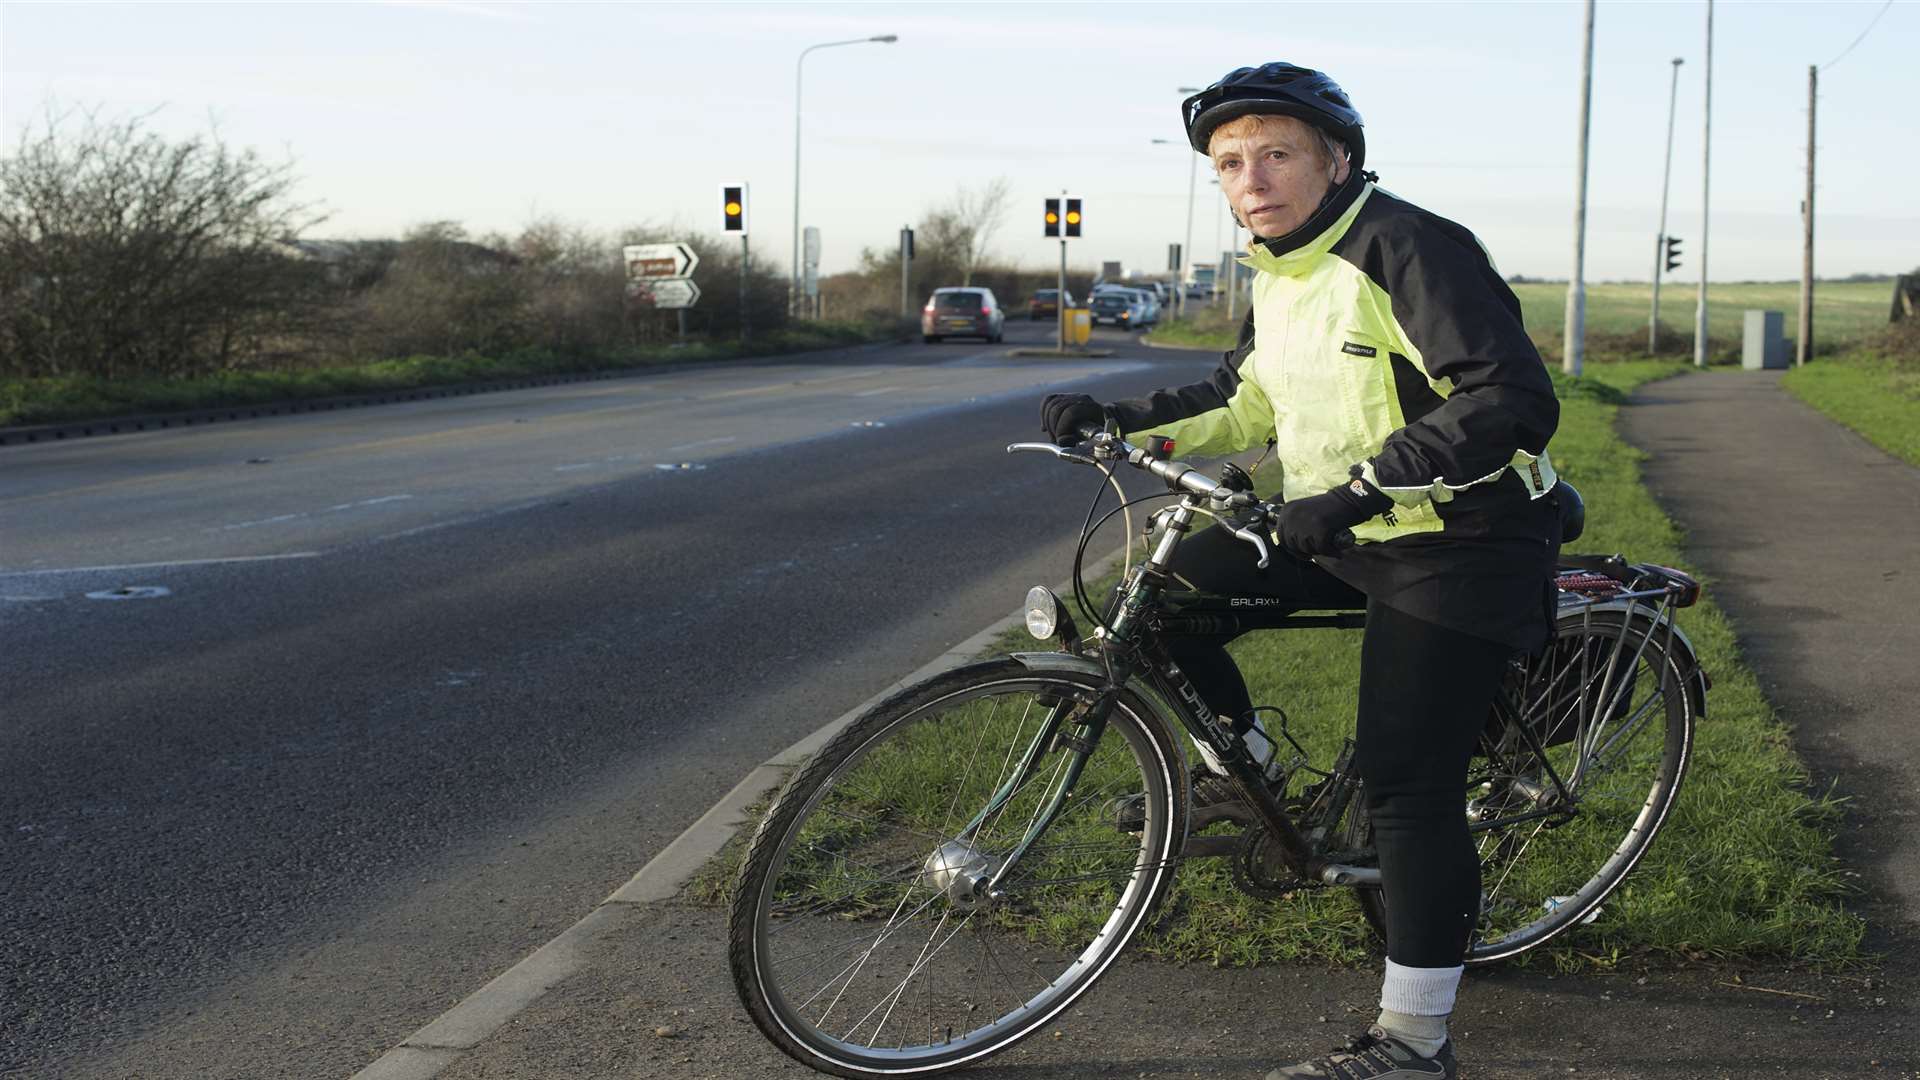 The grandmother's handlebar was clipped by the wing mirror of a car trying to overtake her